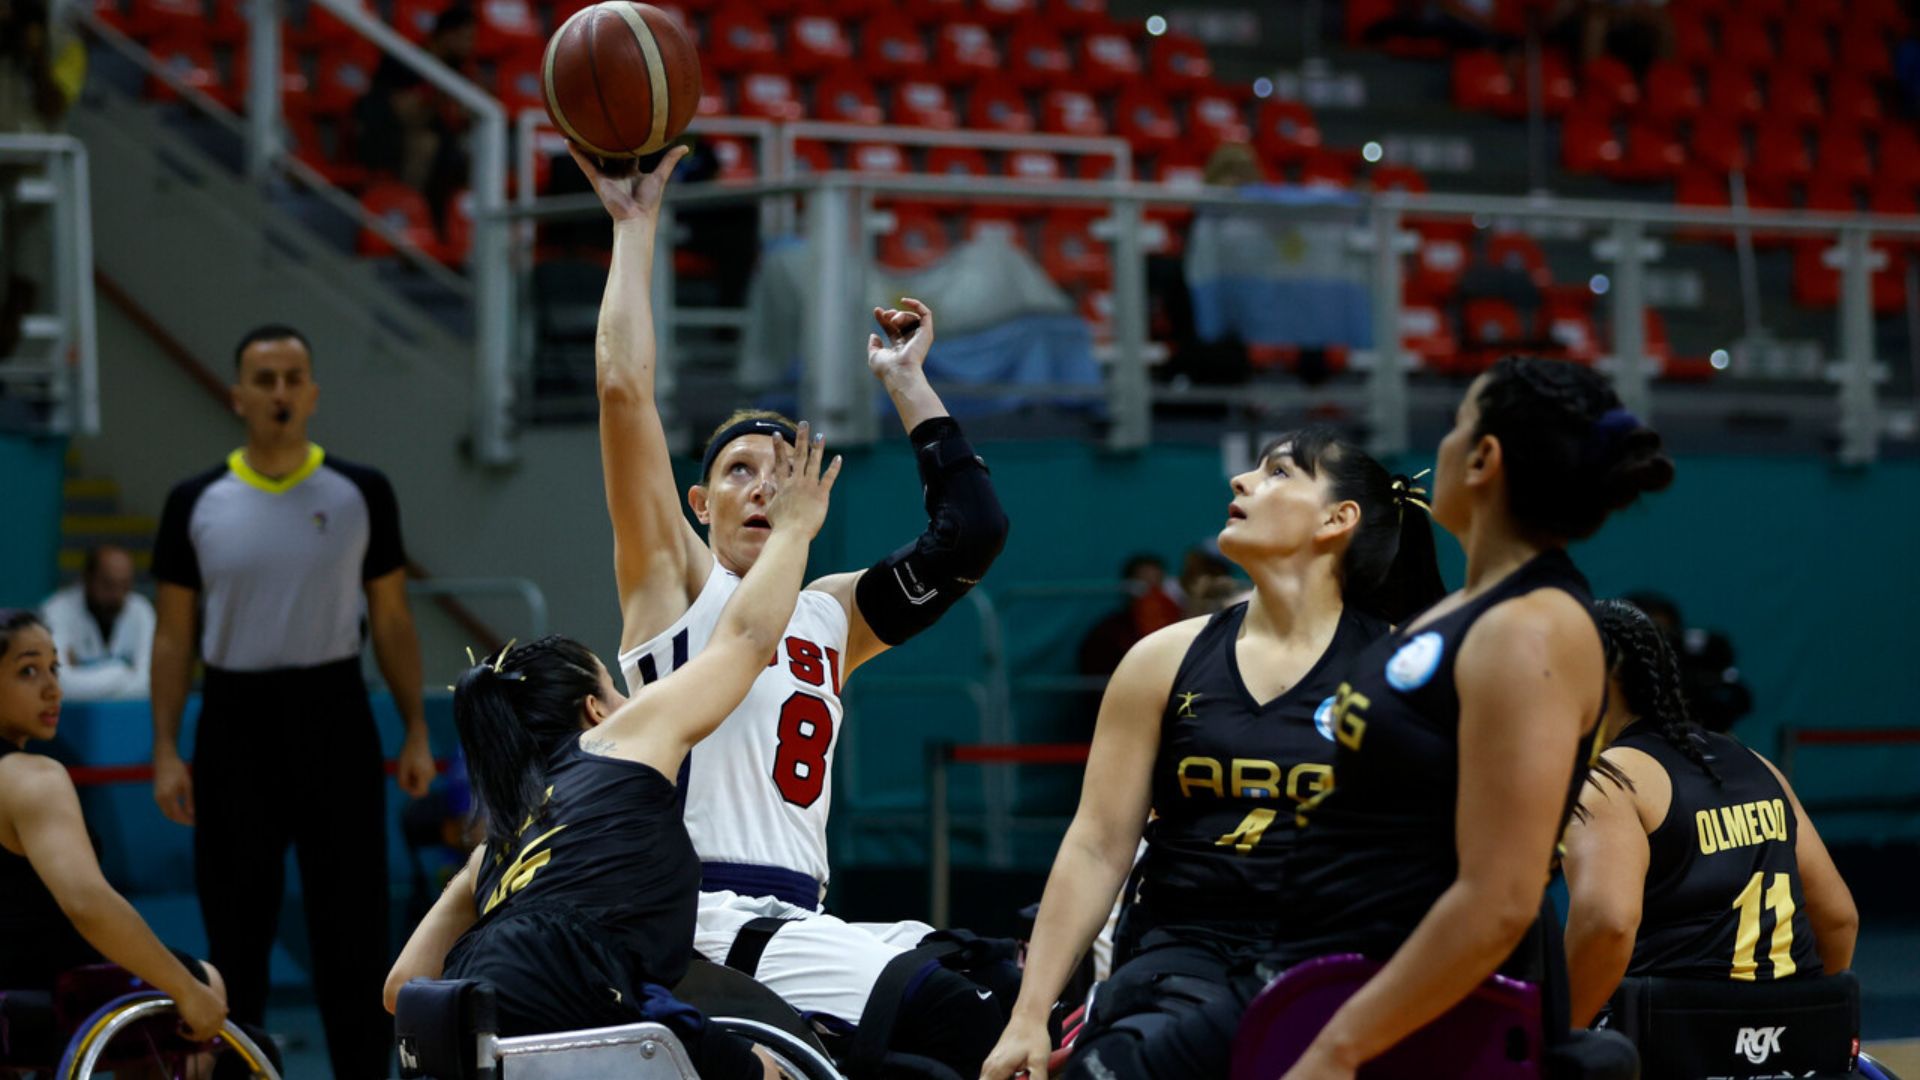 Wheelchair Basketball: The U.S. Closes First Round with Another Landslide